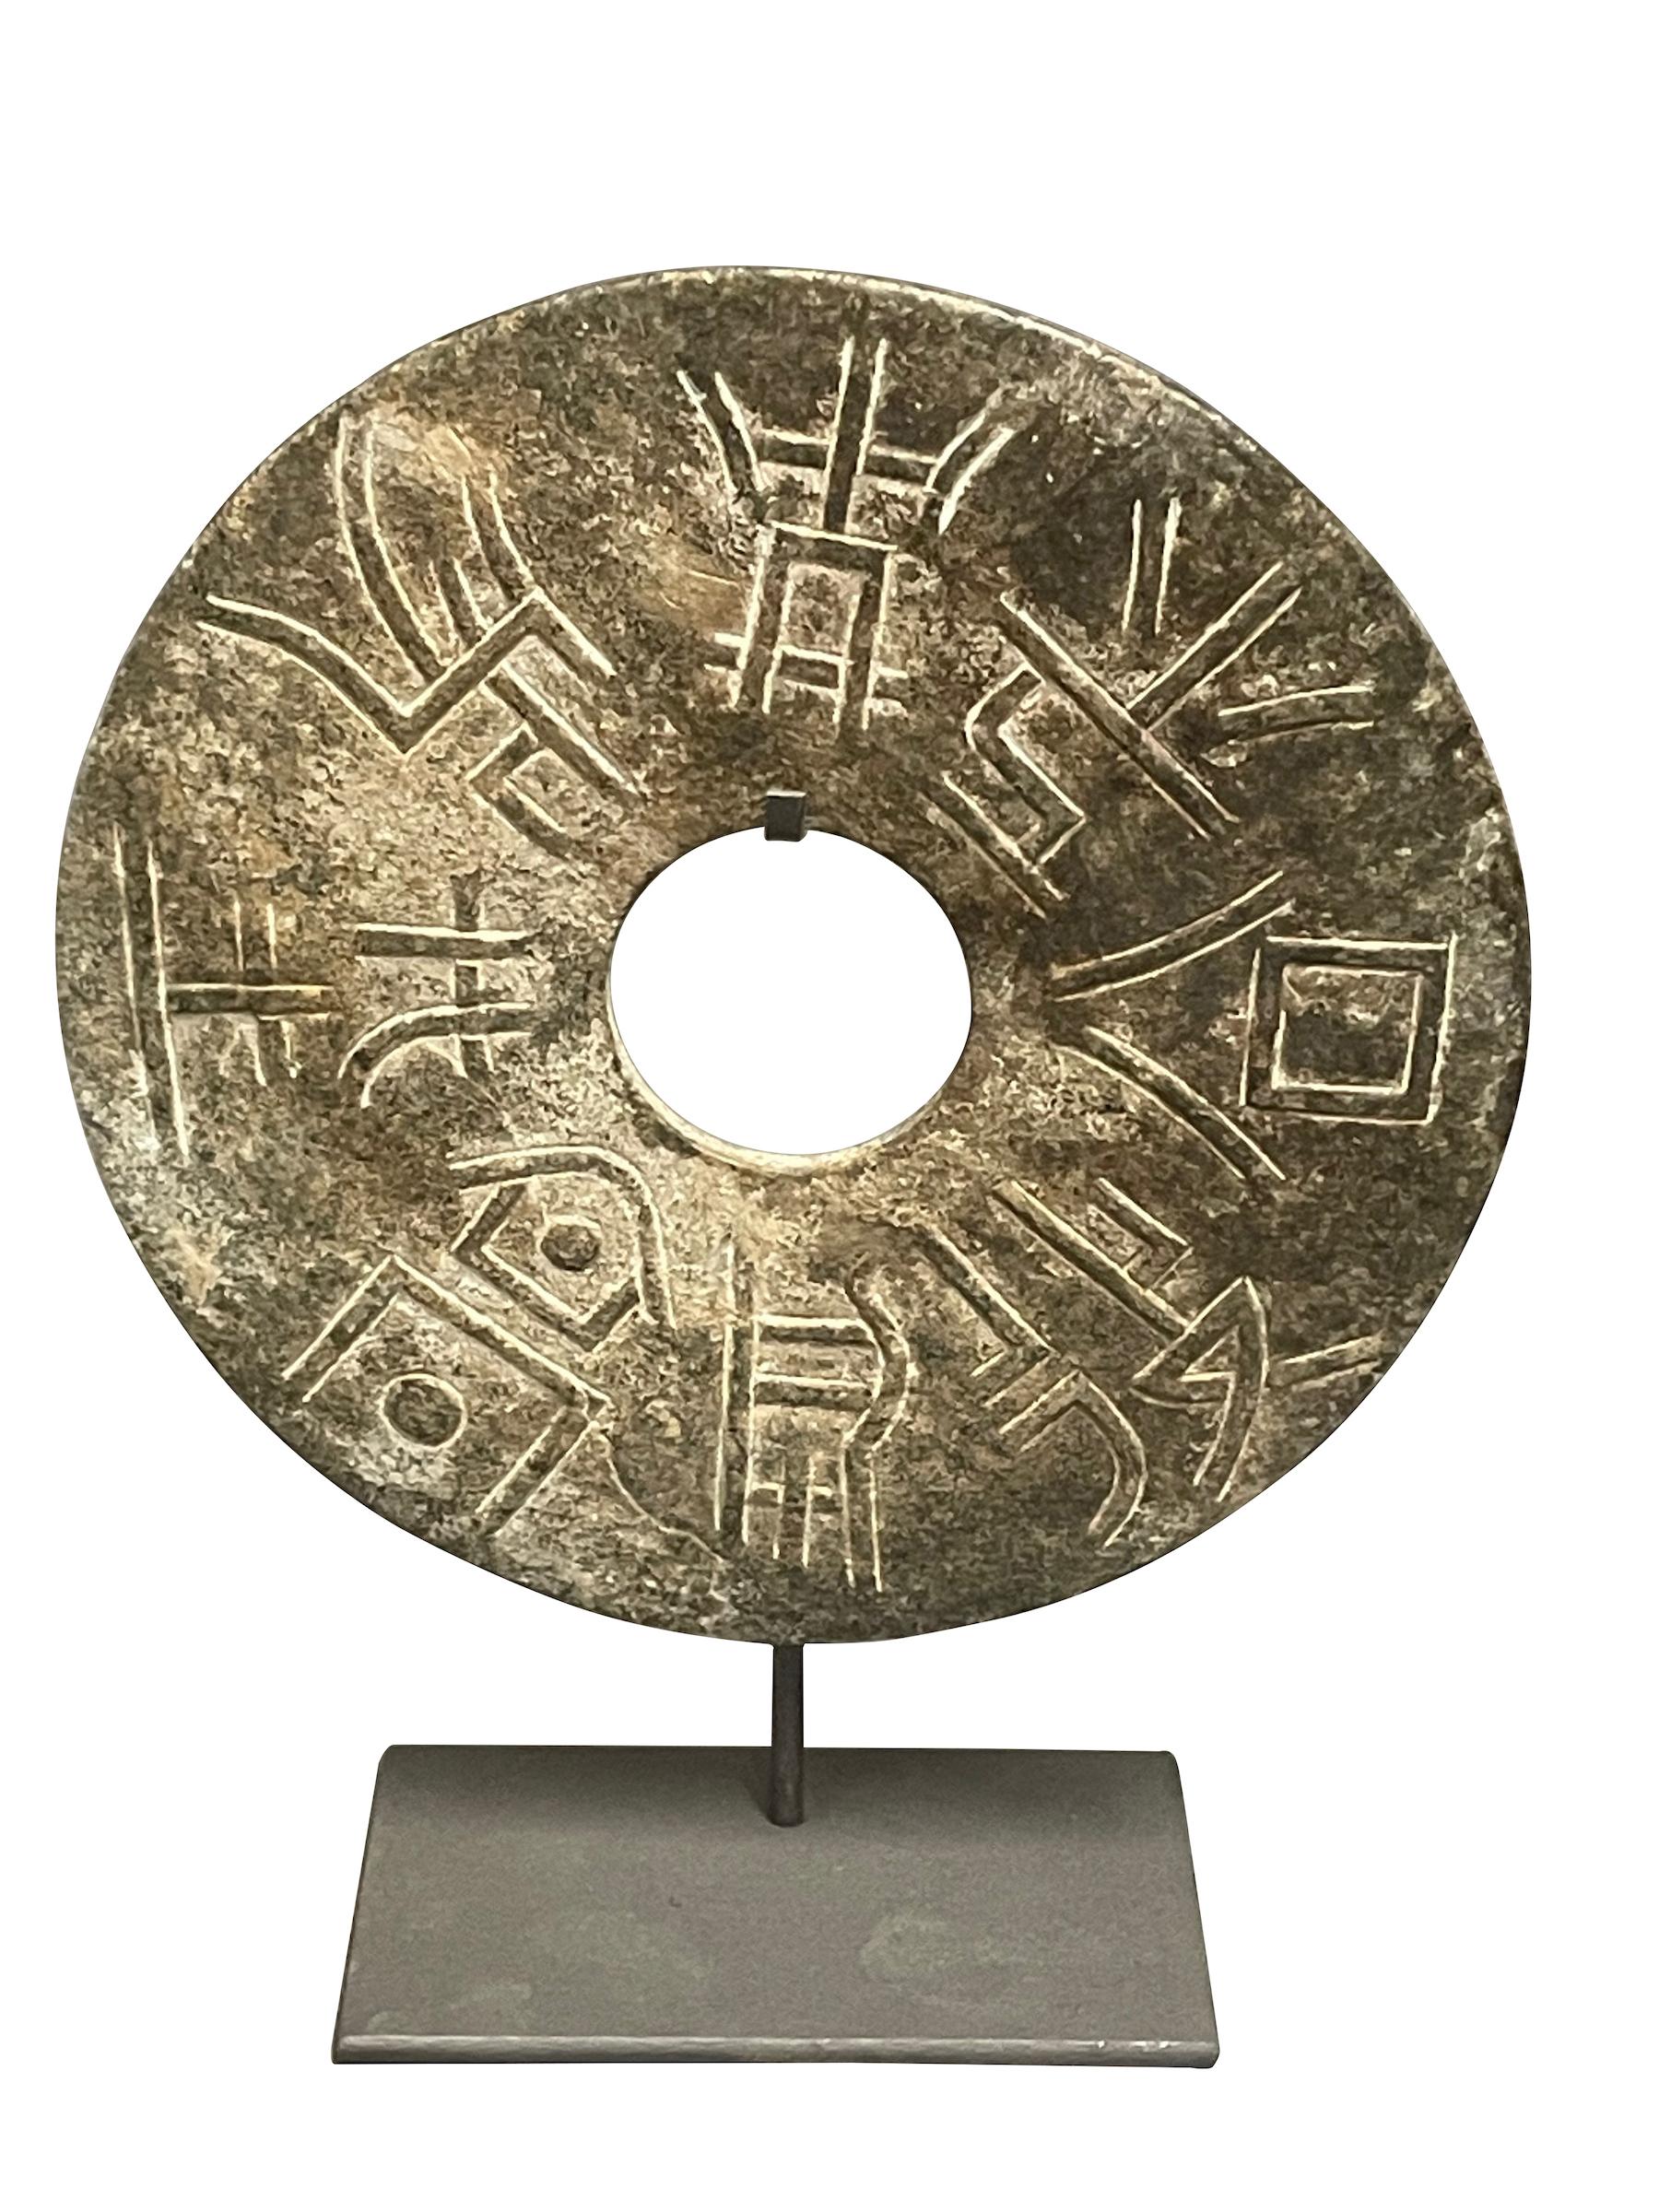 Contemporary Chinese single textured jade disc on metal stand.
Mottled moss green in color.
Stand measures  6  x  4
Sits well with hand carved stone semi circle with capital motif.
Sits well with hand carved abstract stone bird.
